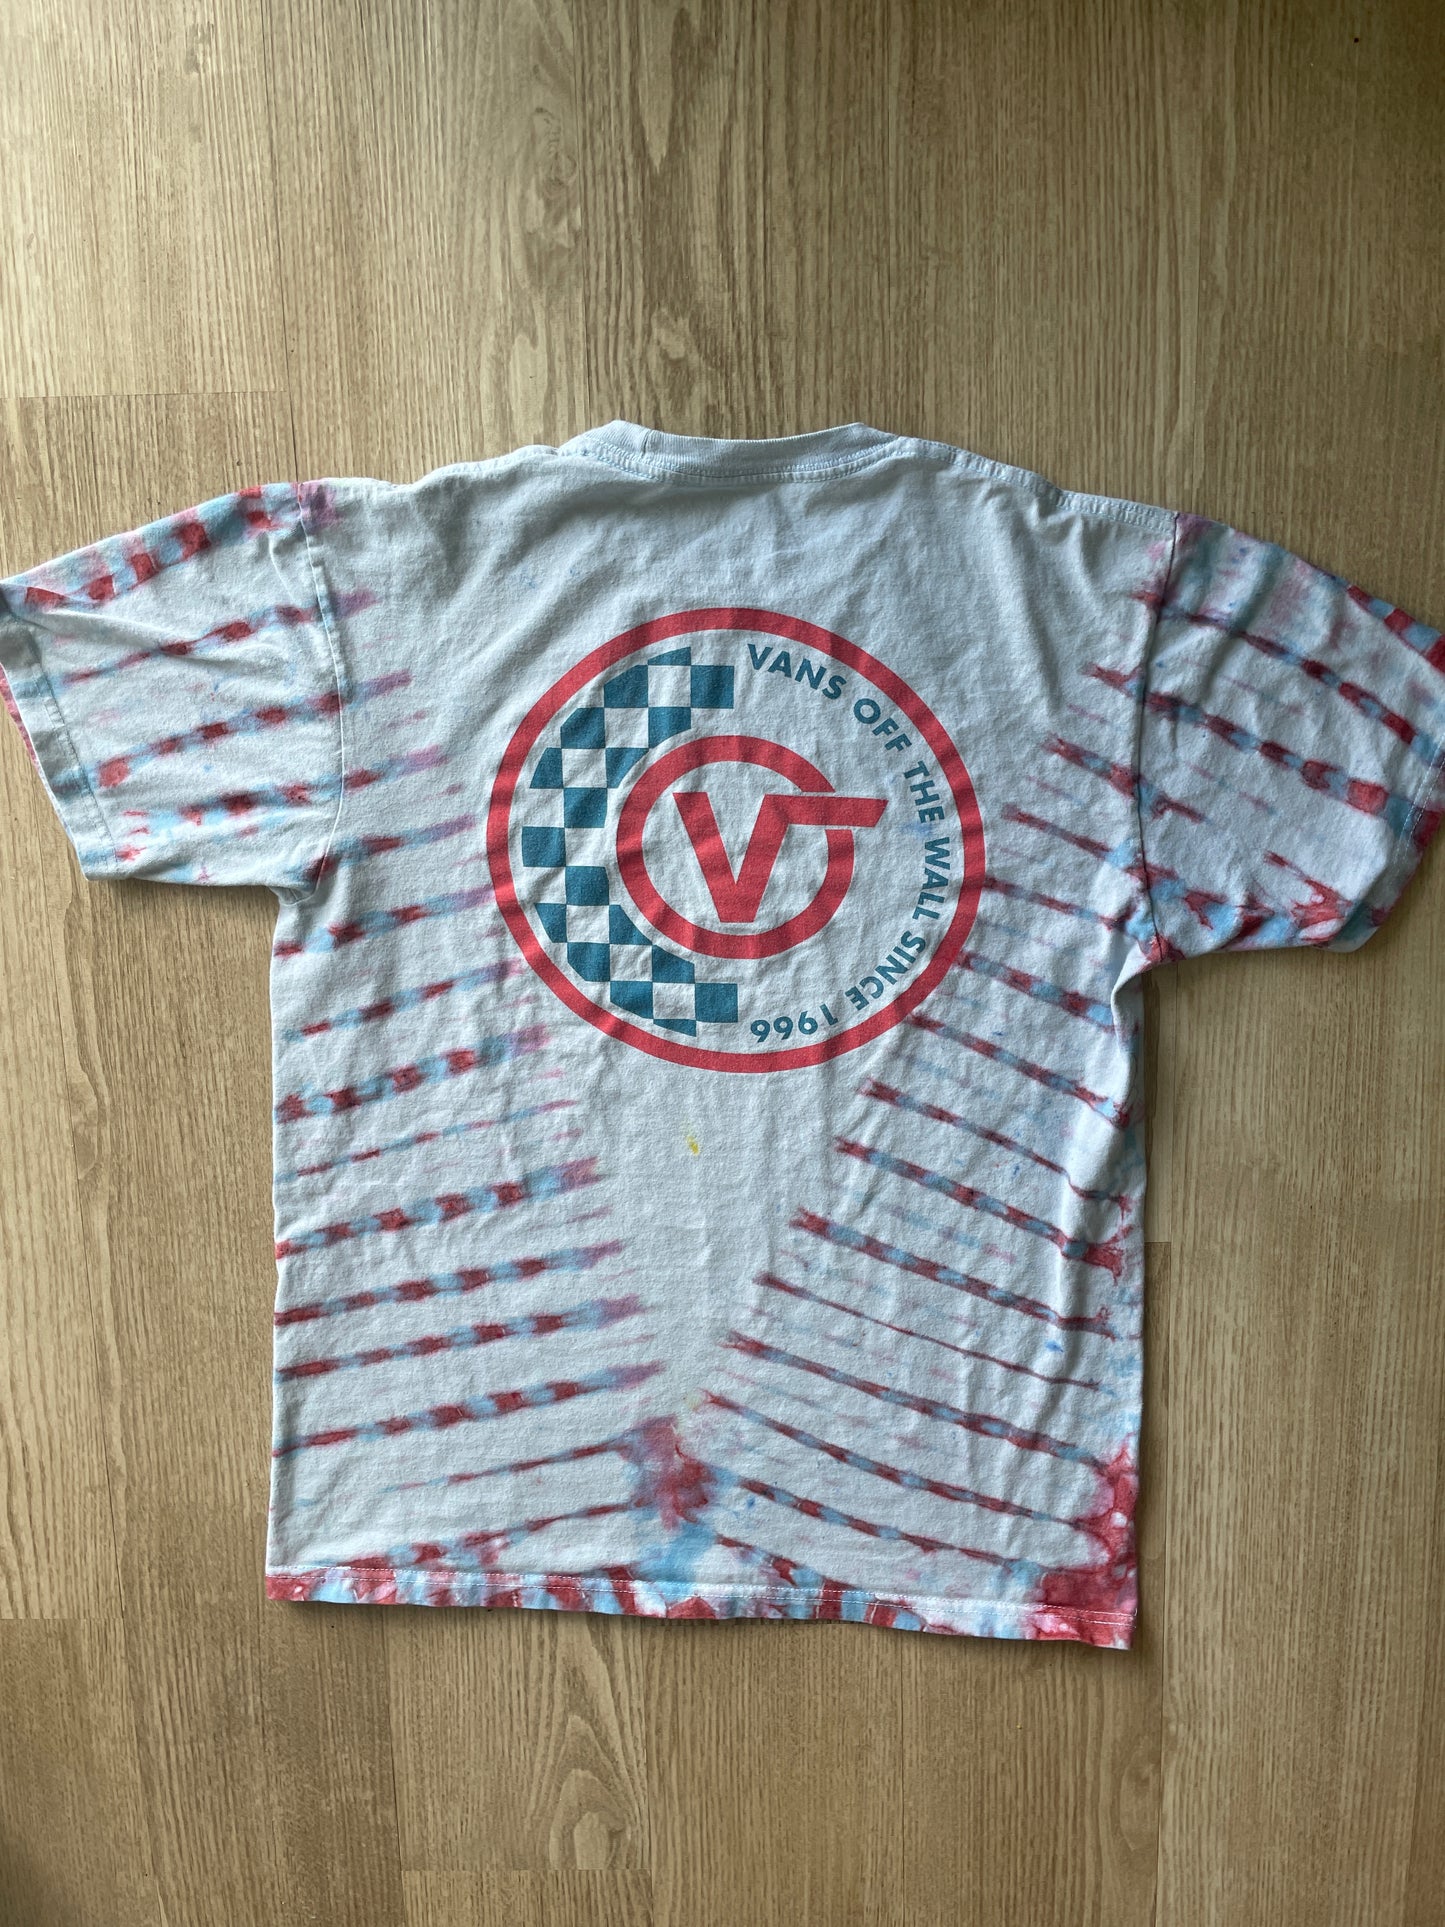 MEDIUM Men’s Van's Off the Wall Doublesided Handmade Tie Dye T-Shirt | One-Of-a-Kind Pastel Pink and Blue Short Sleeve